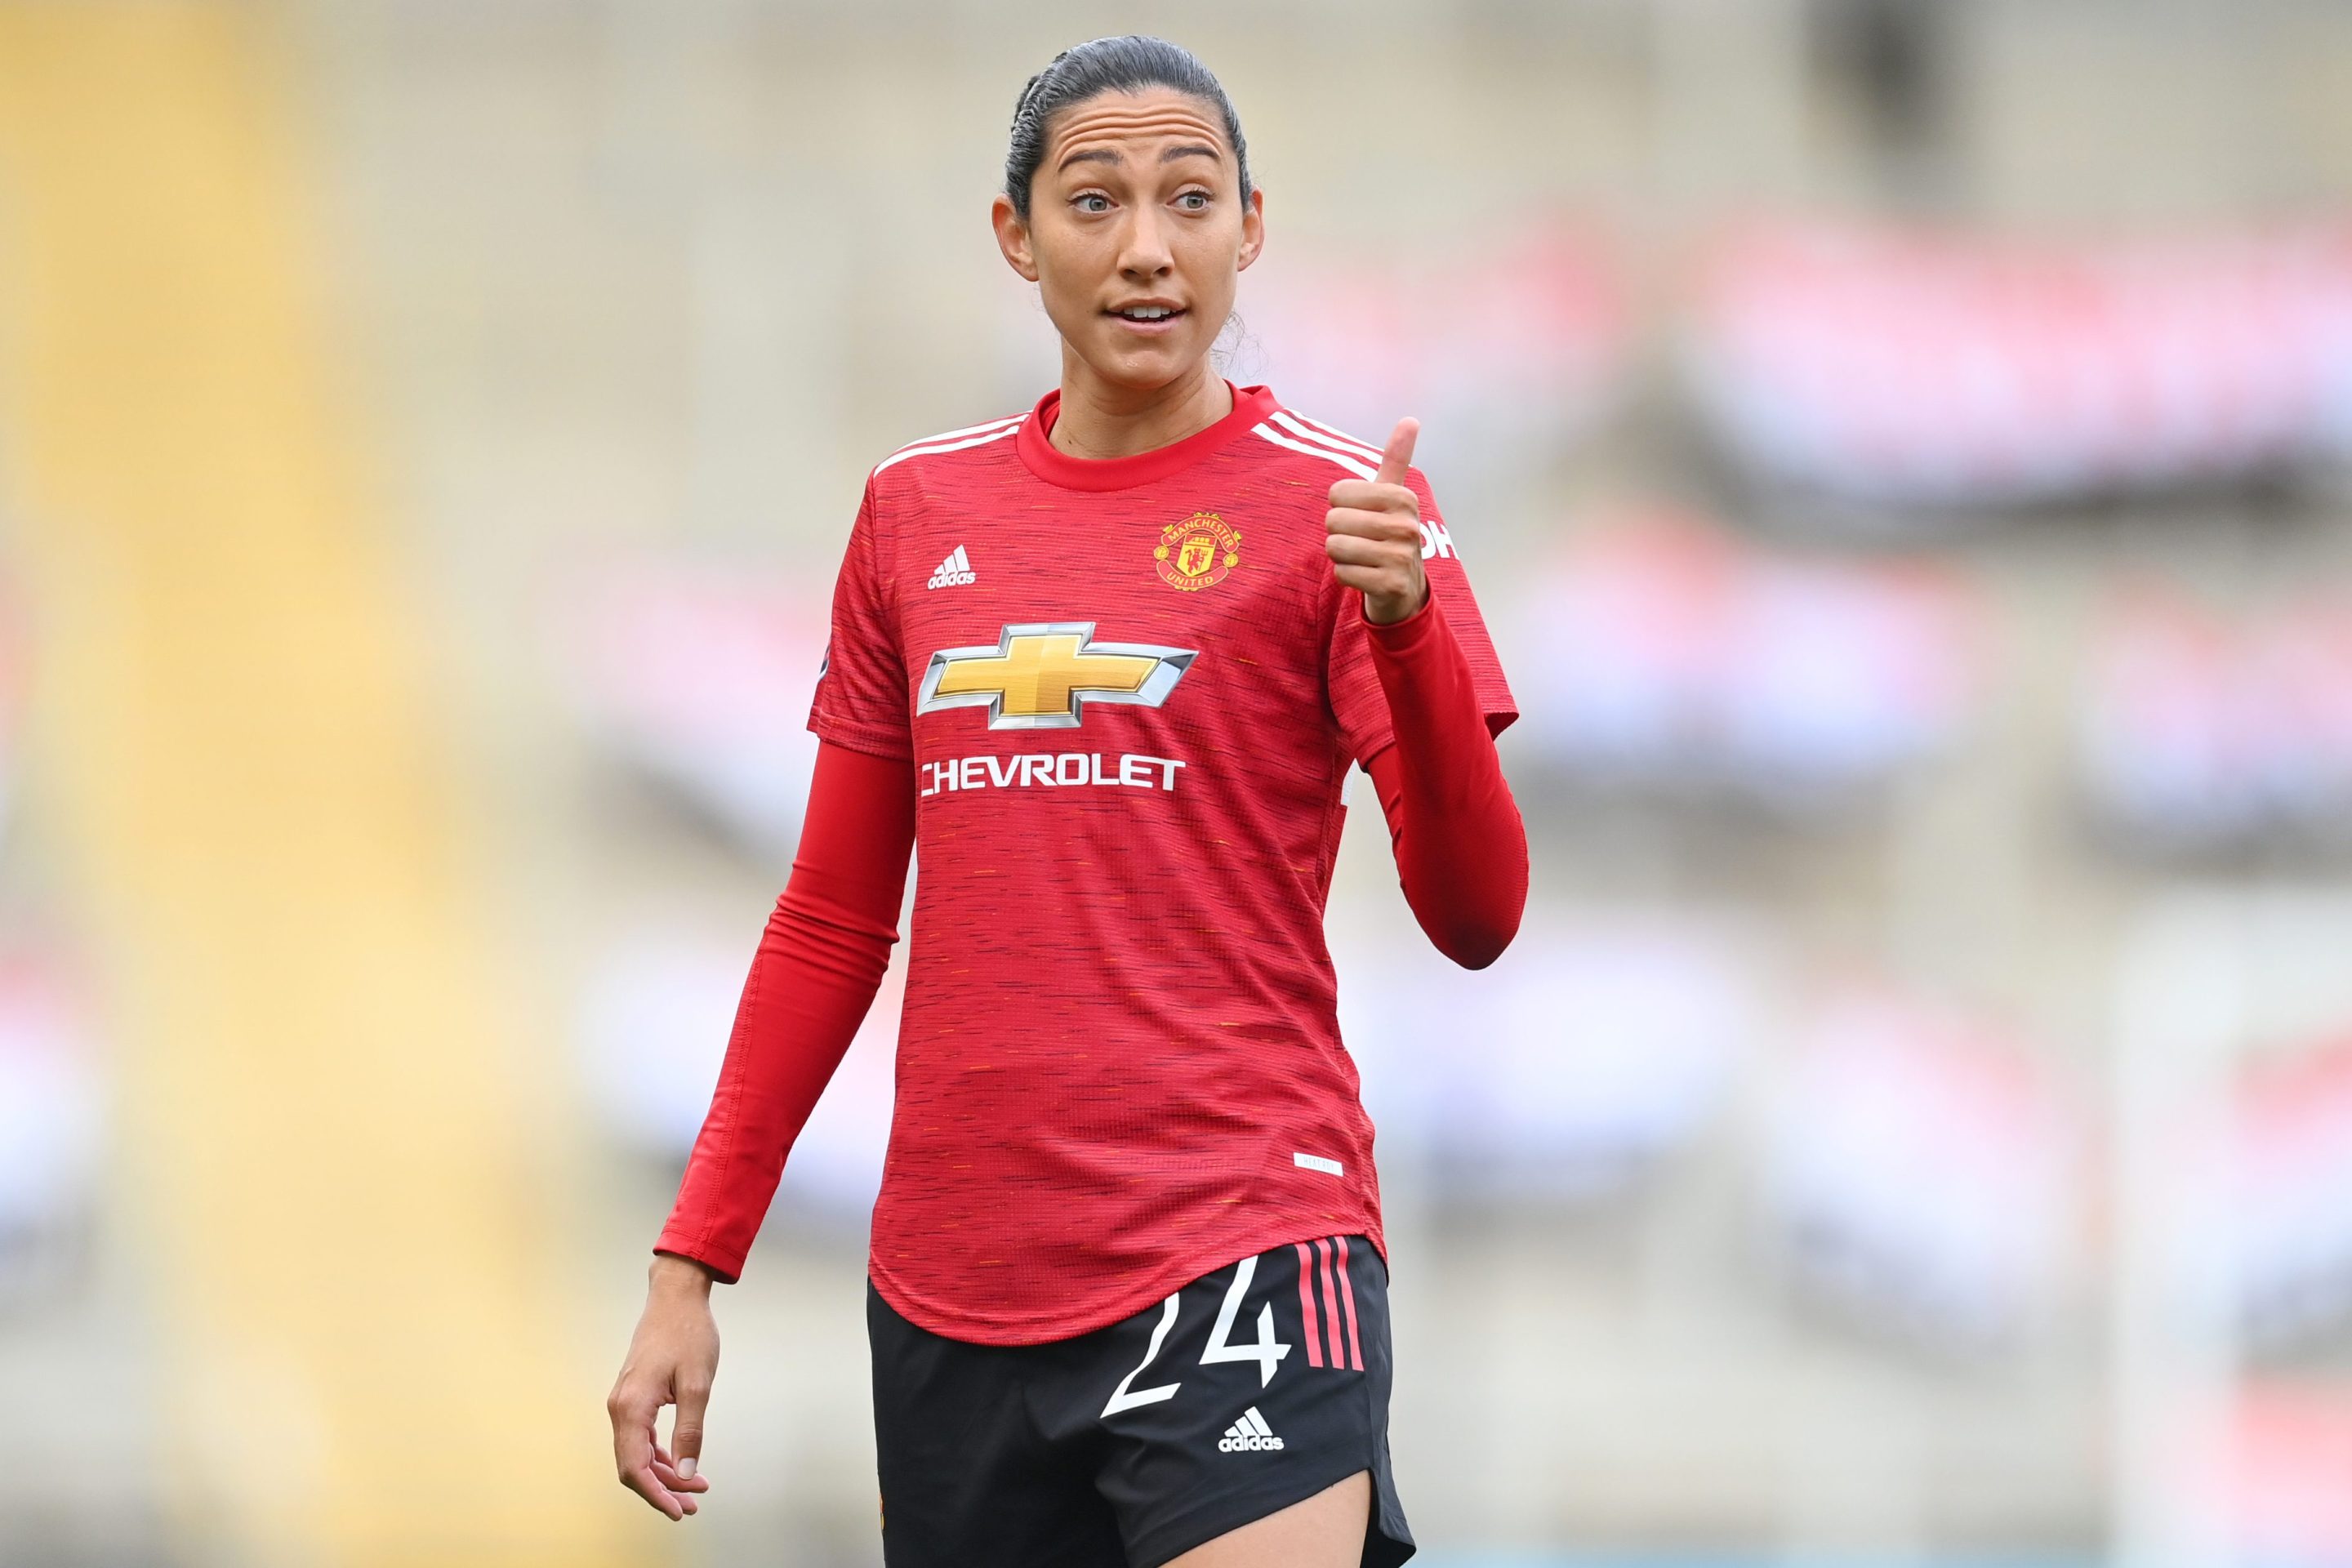 Christen Press of Manchester United looks on and gives a thumbs up during the Barclays FA Women's Super League match between Manchester United Women and Manchester City Women at Leigh Sports Village on November 14, 2020 in Leigh, England.